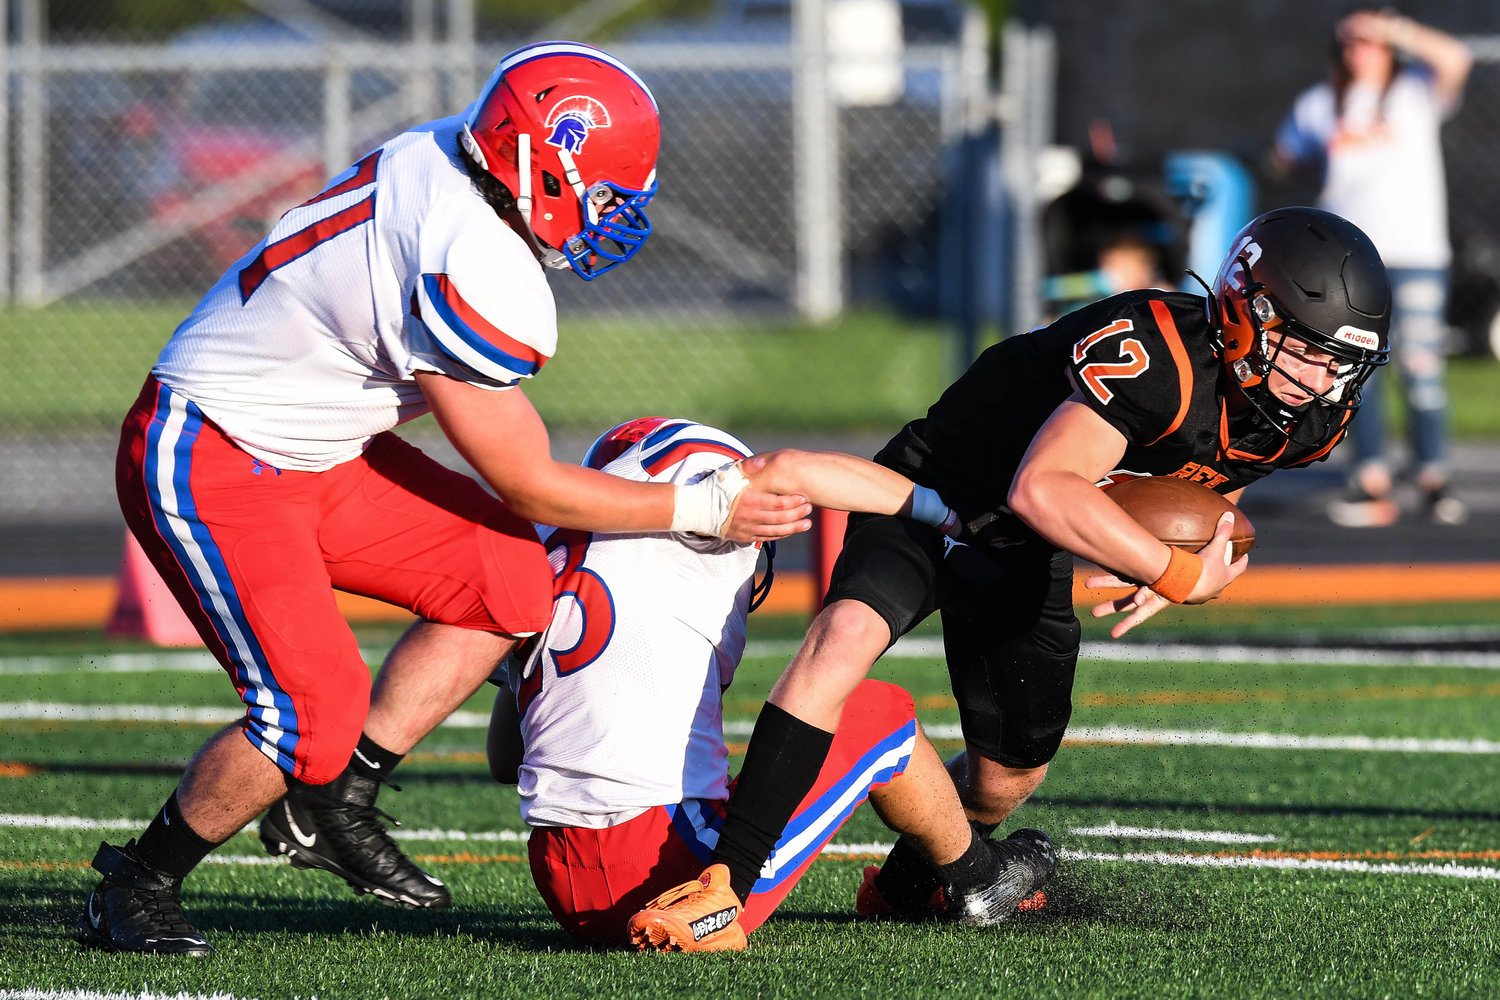 Rome Free Academy quarterback Evan Carlson-Stephenson is sacked by New Hartford's Nick Perrotta, center, and Michael Graziano during the game on Friday at RFA Stadium. New Hartford won 52-26 in both teams' first game of the season.